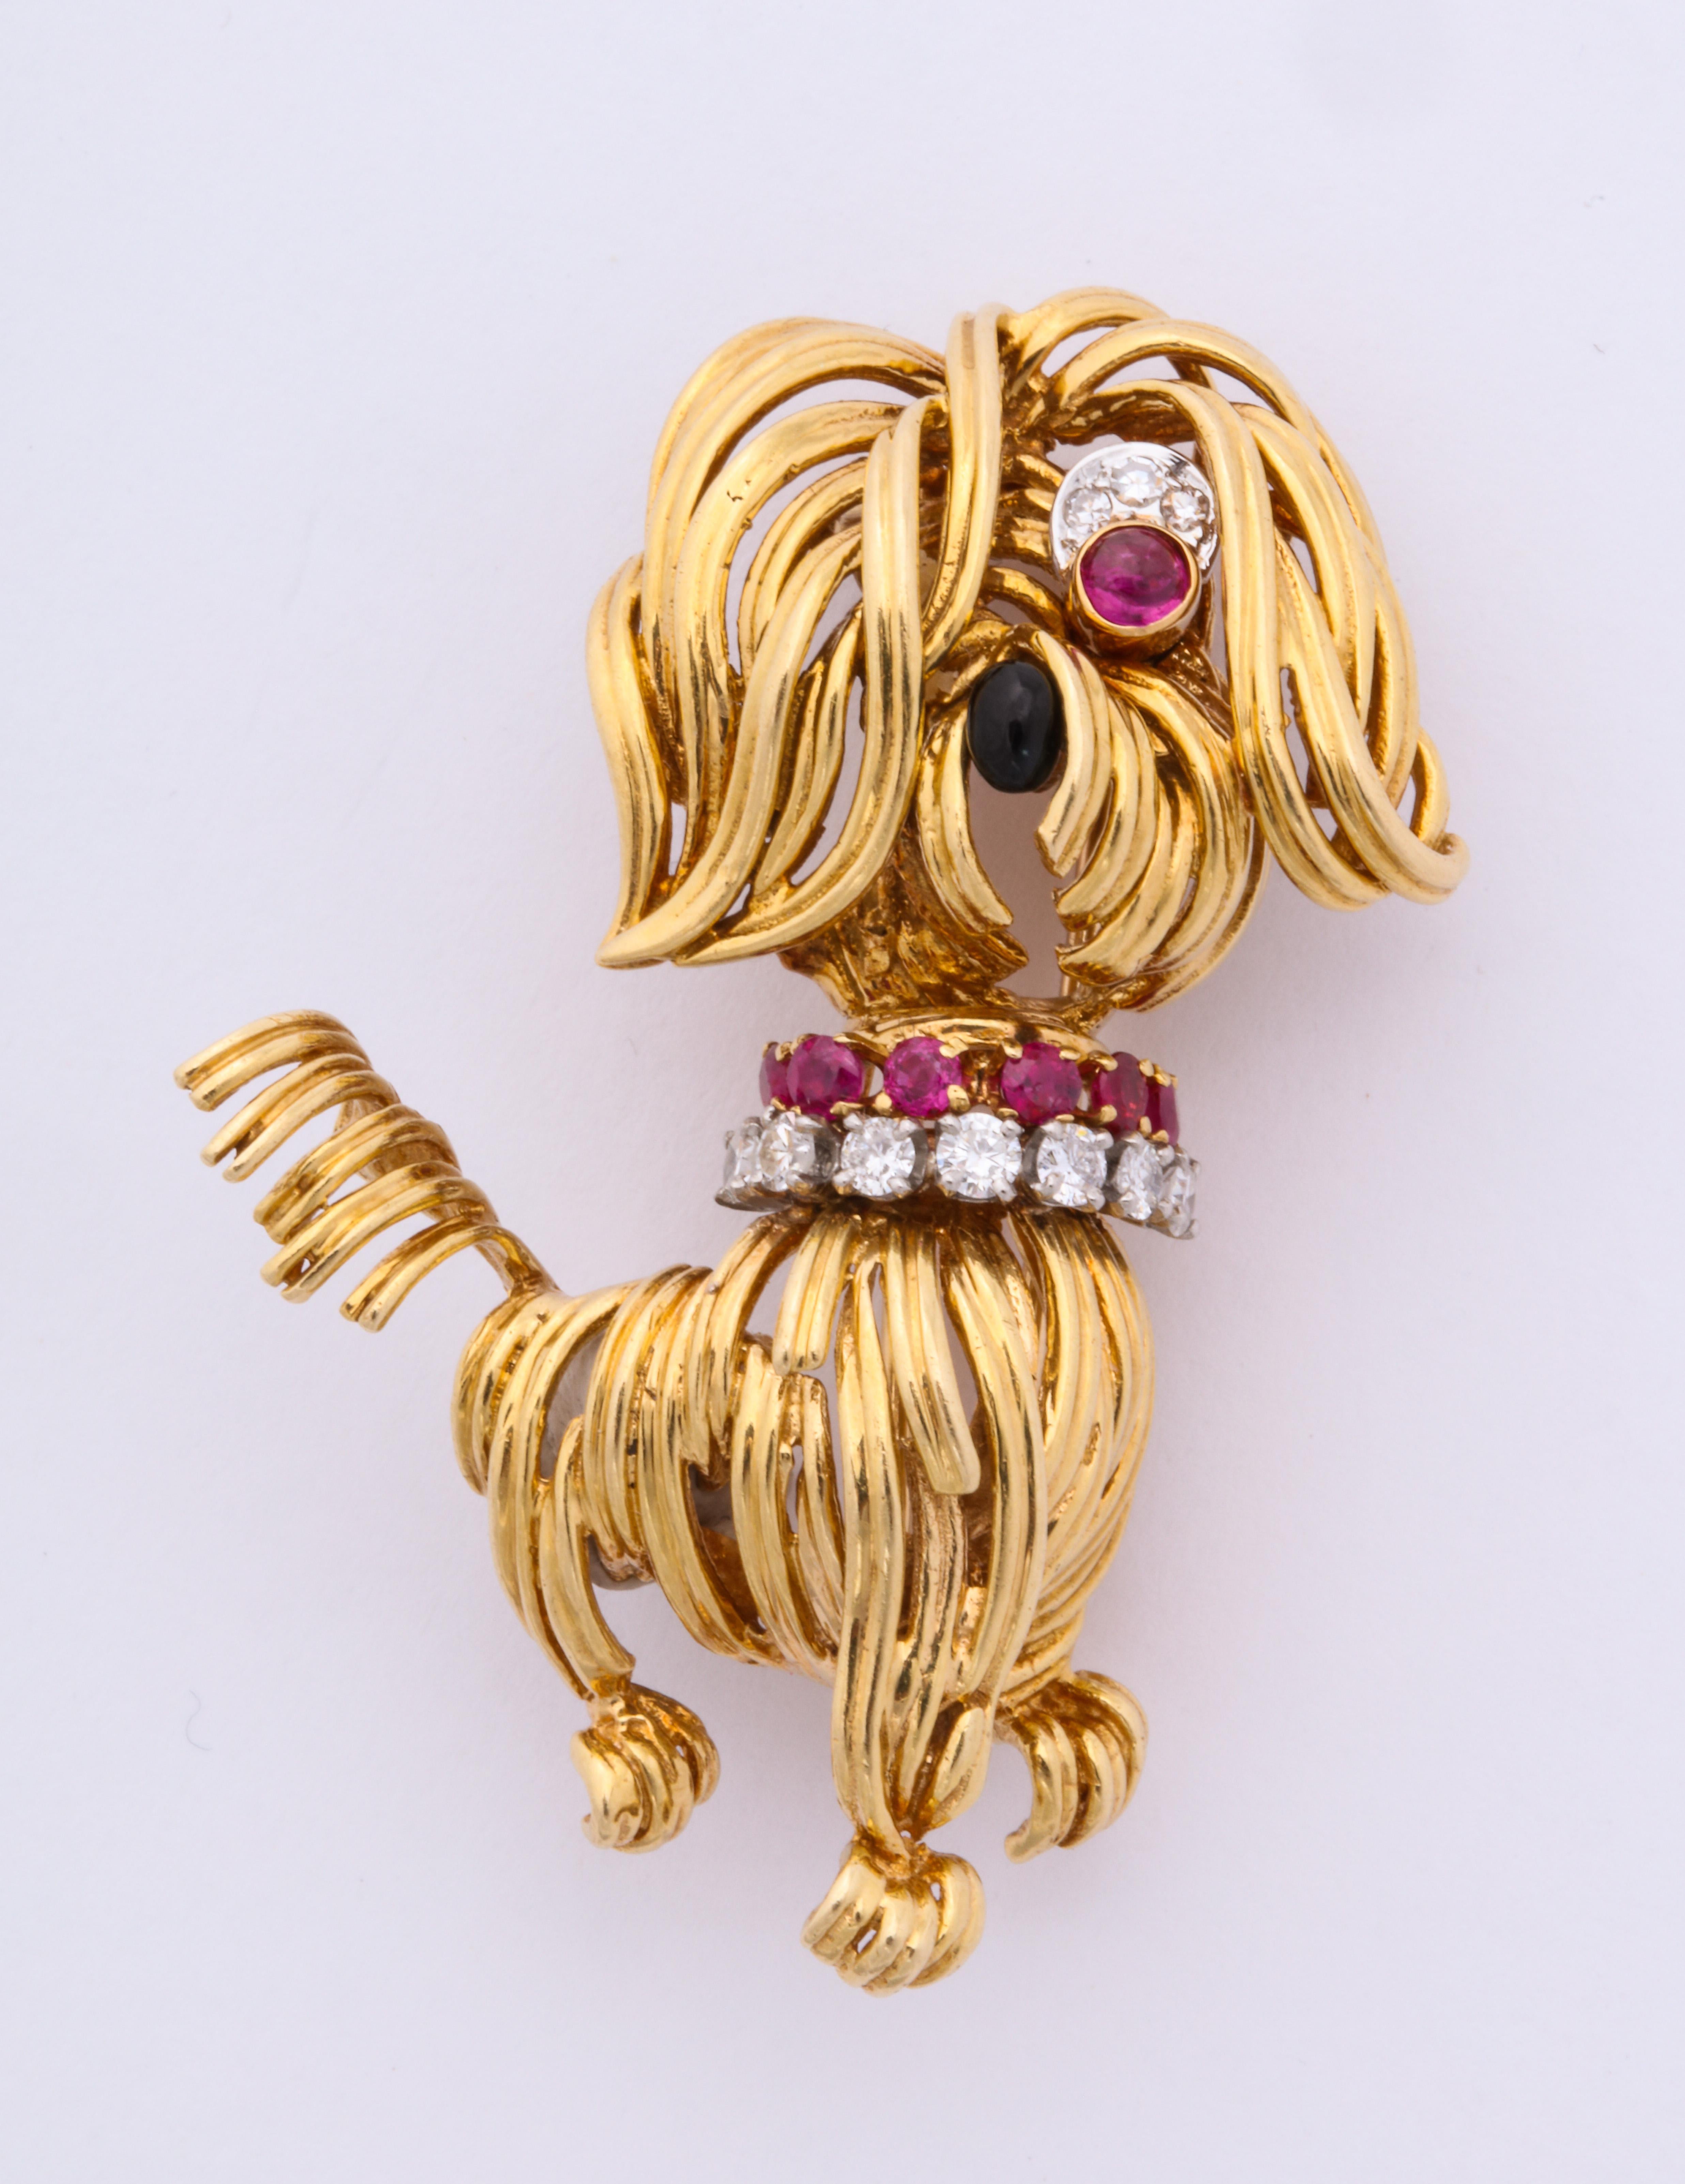 Van Cleef & Arpels 18kt yellow gold, ruby, onyx and diamond dog brooch.
Signed and numbered.
Circa 1964